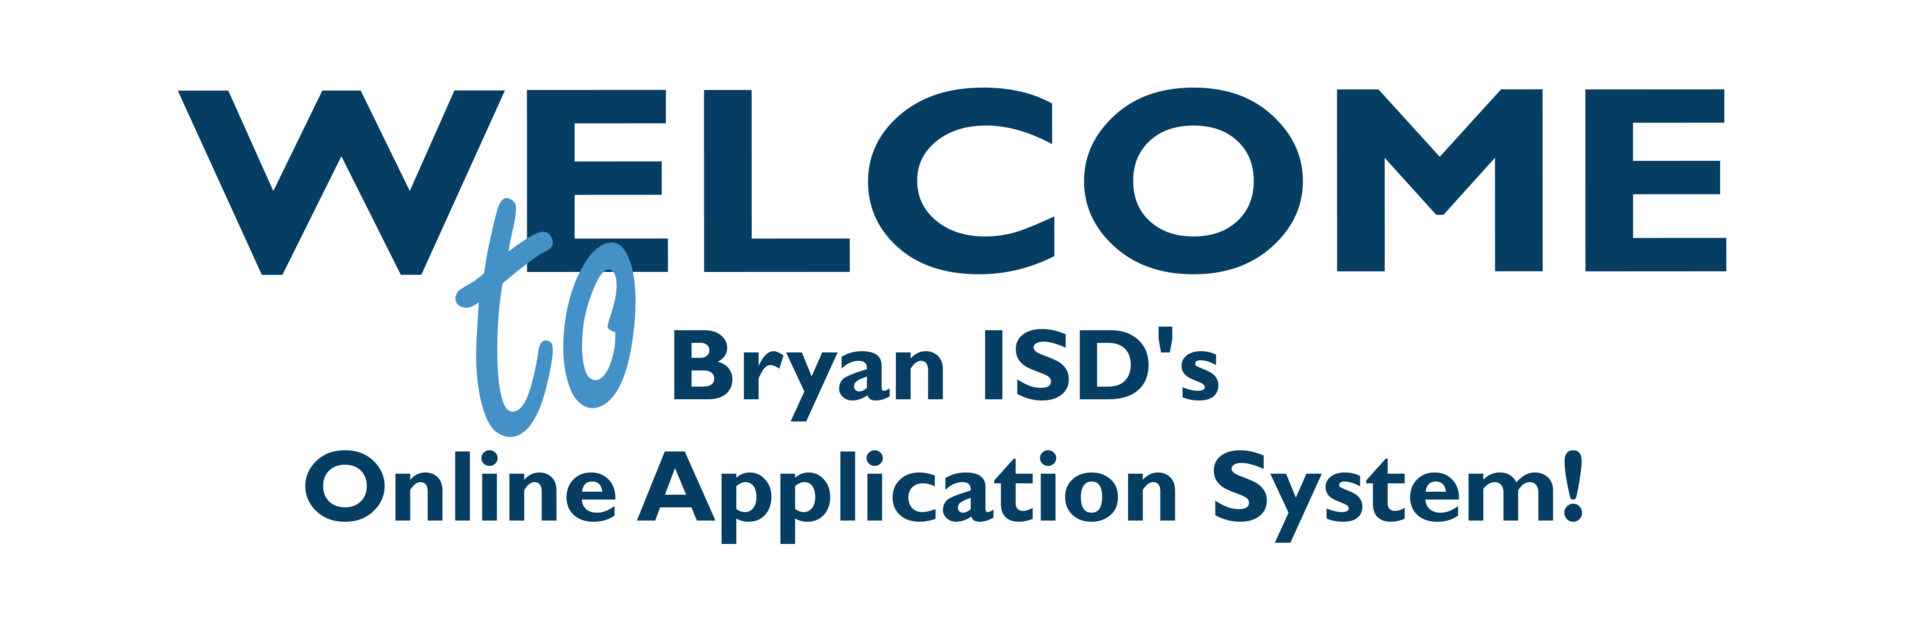 Welcome to Bryan ISD's Online Application System